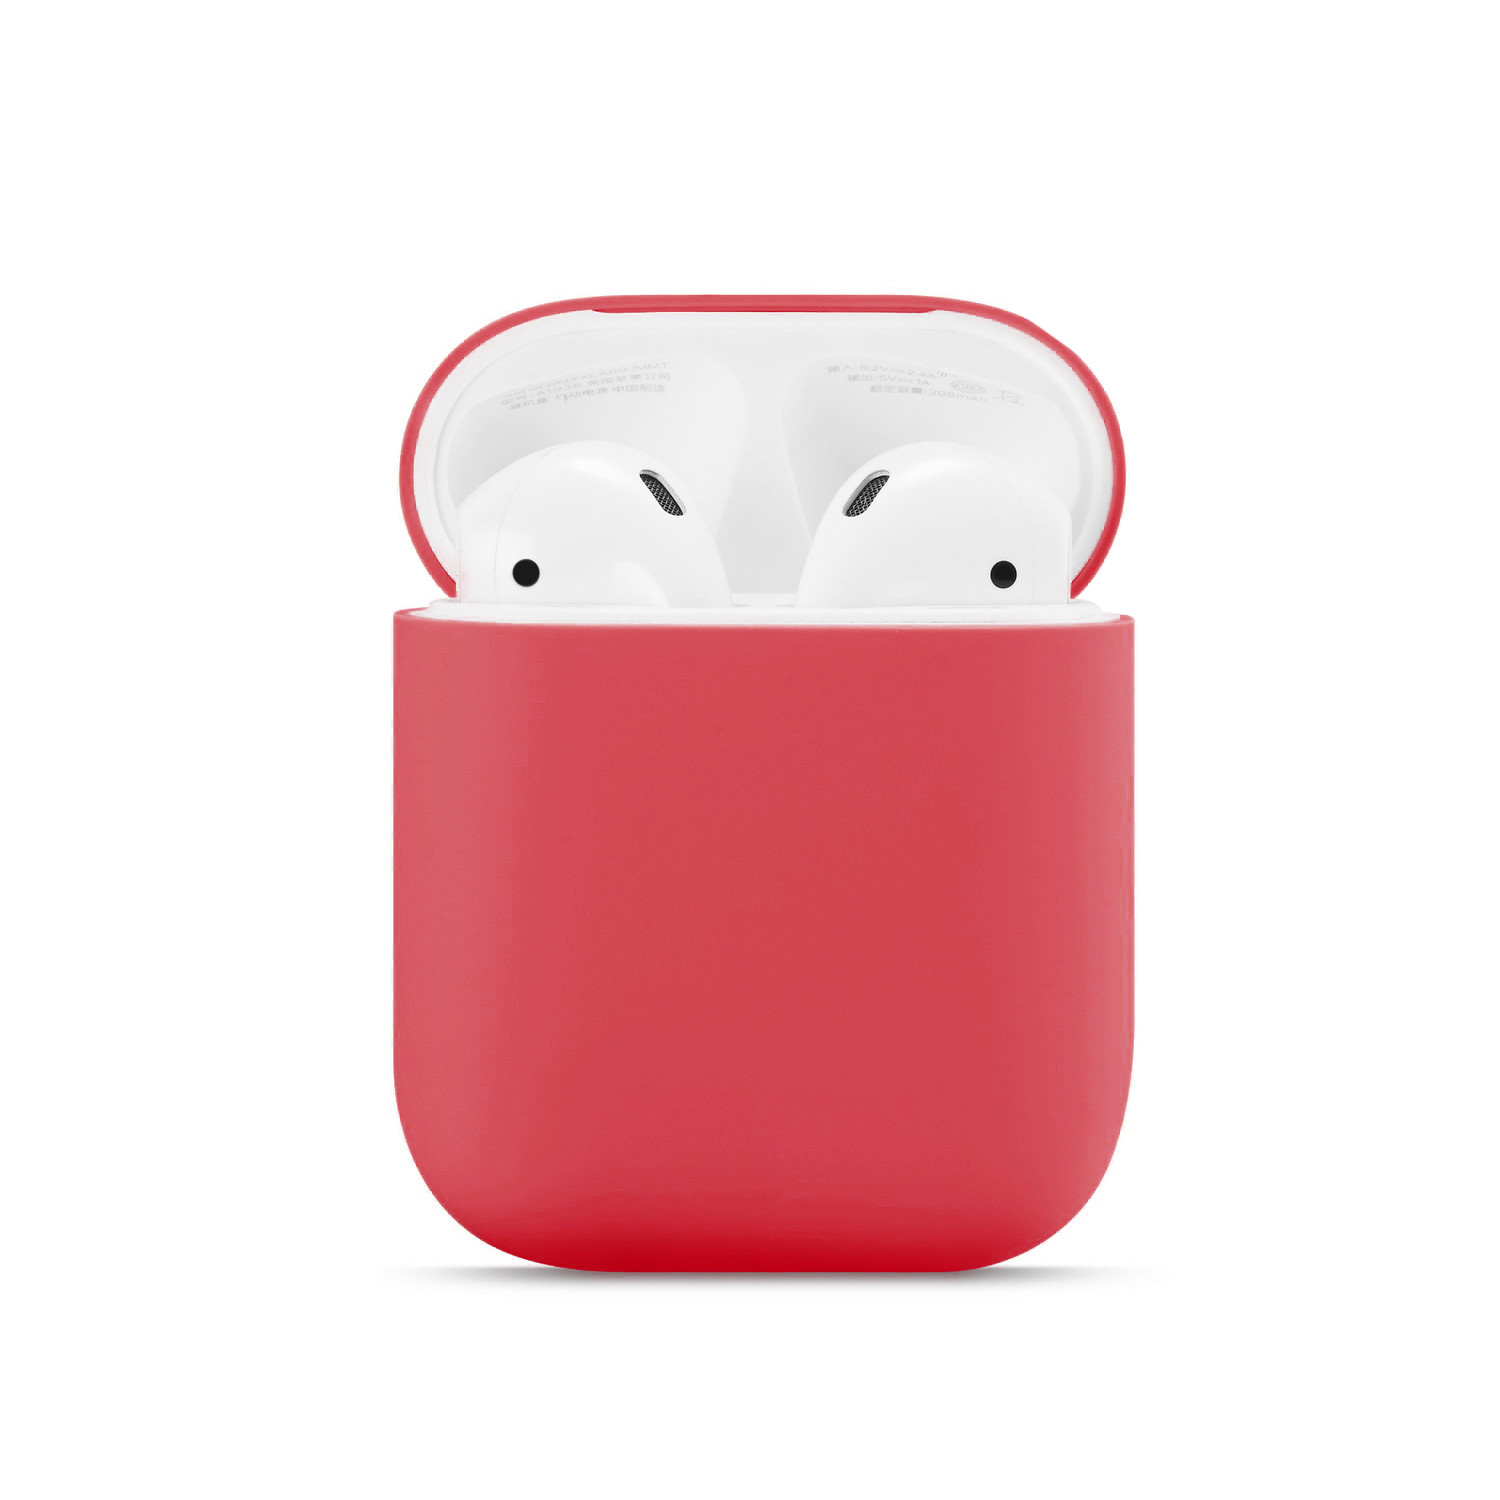 Original Silicone Case for AirPods Red (1) - 3